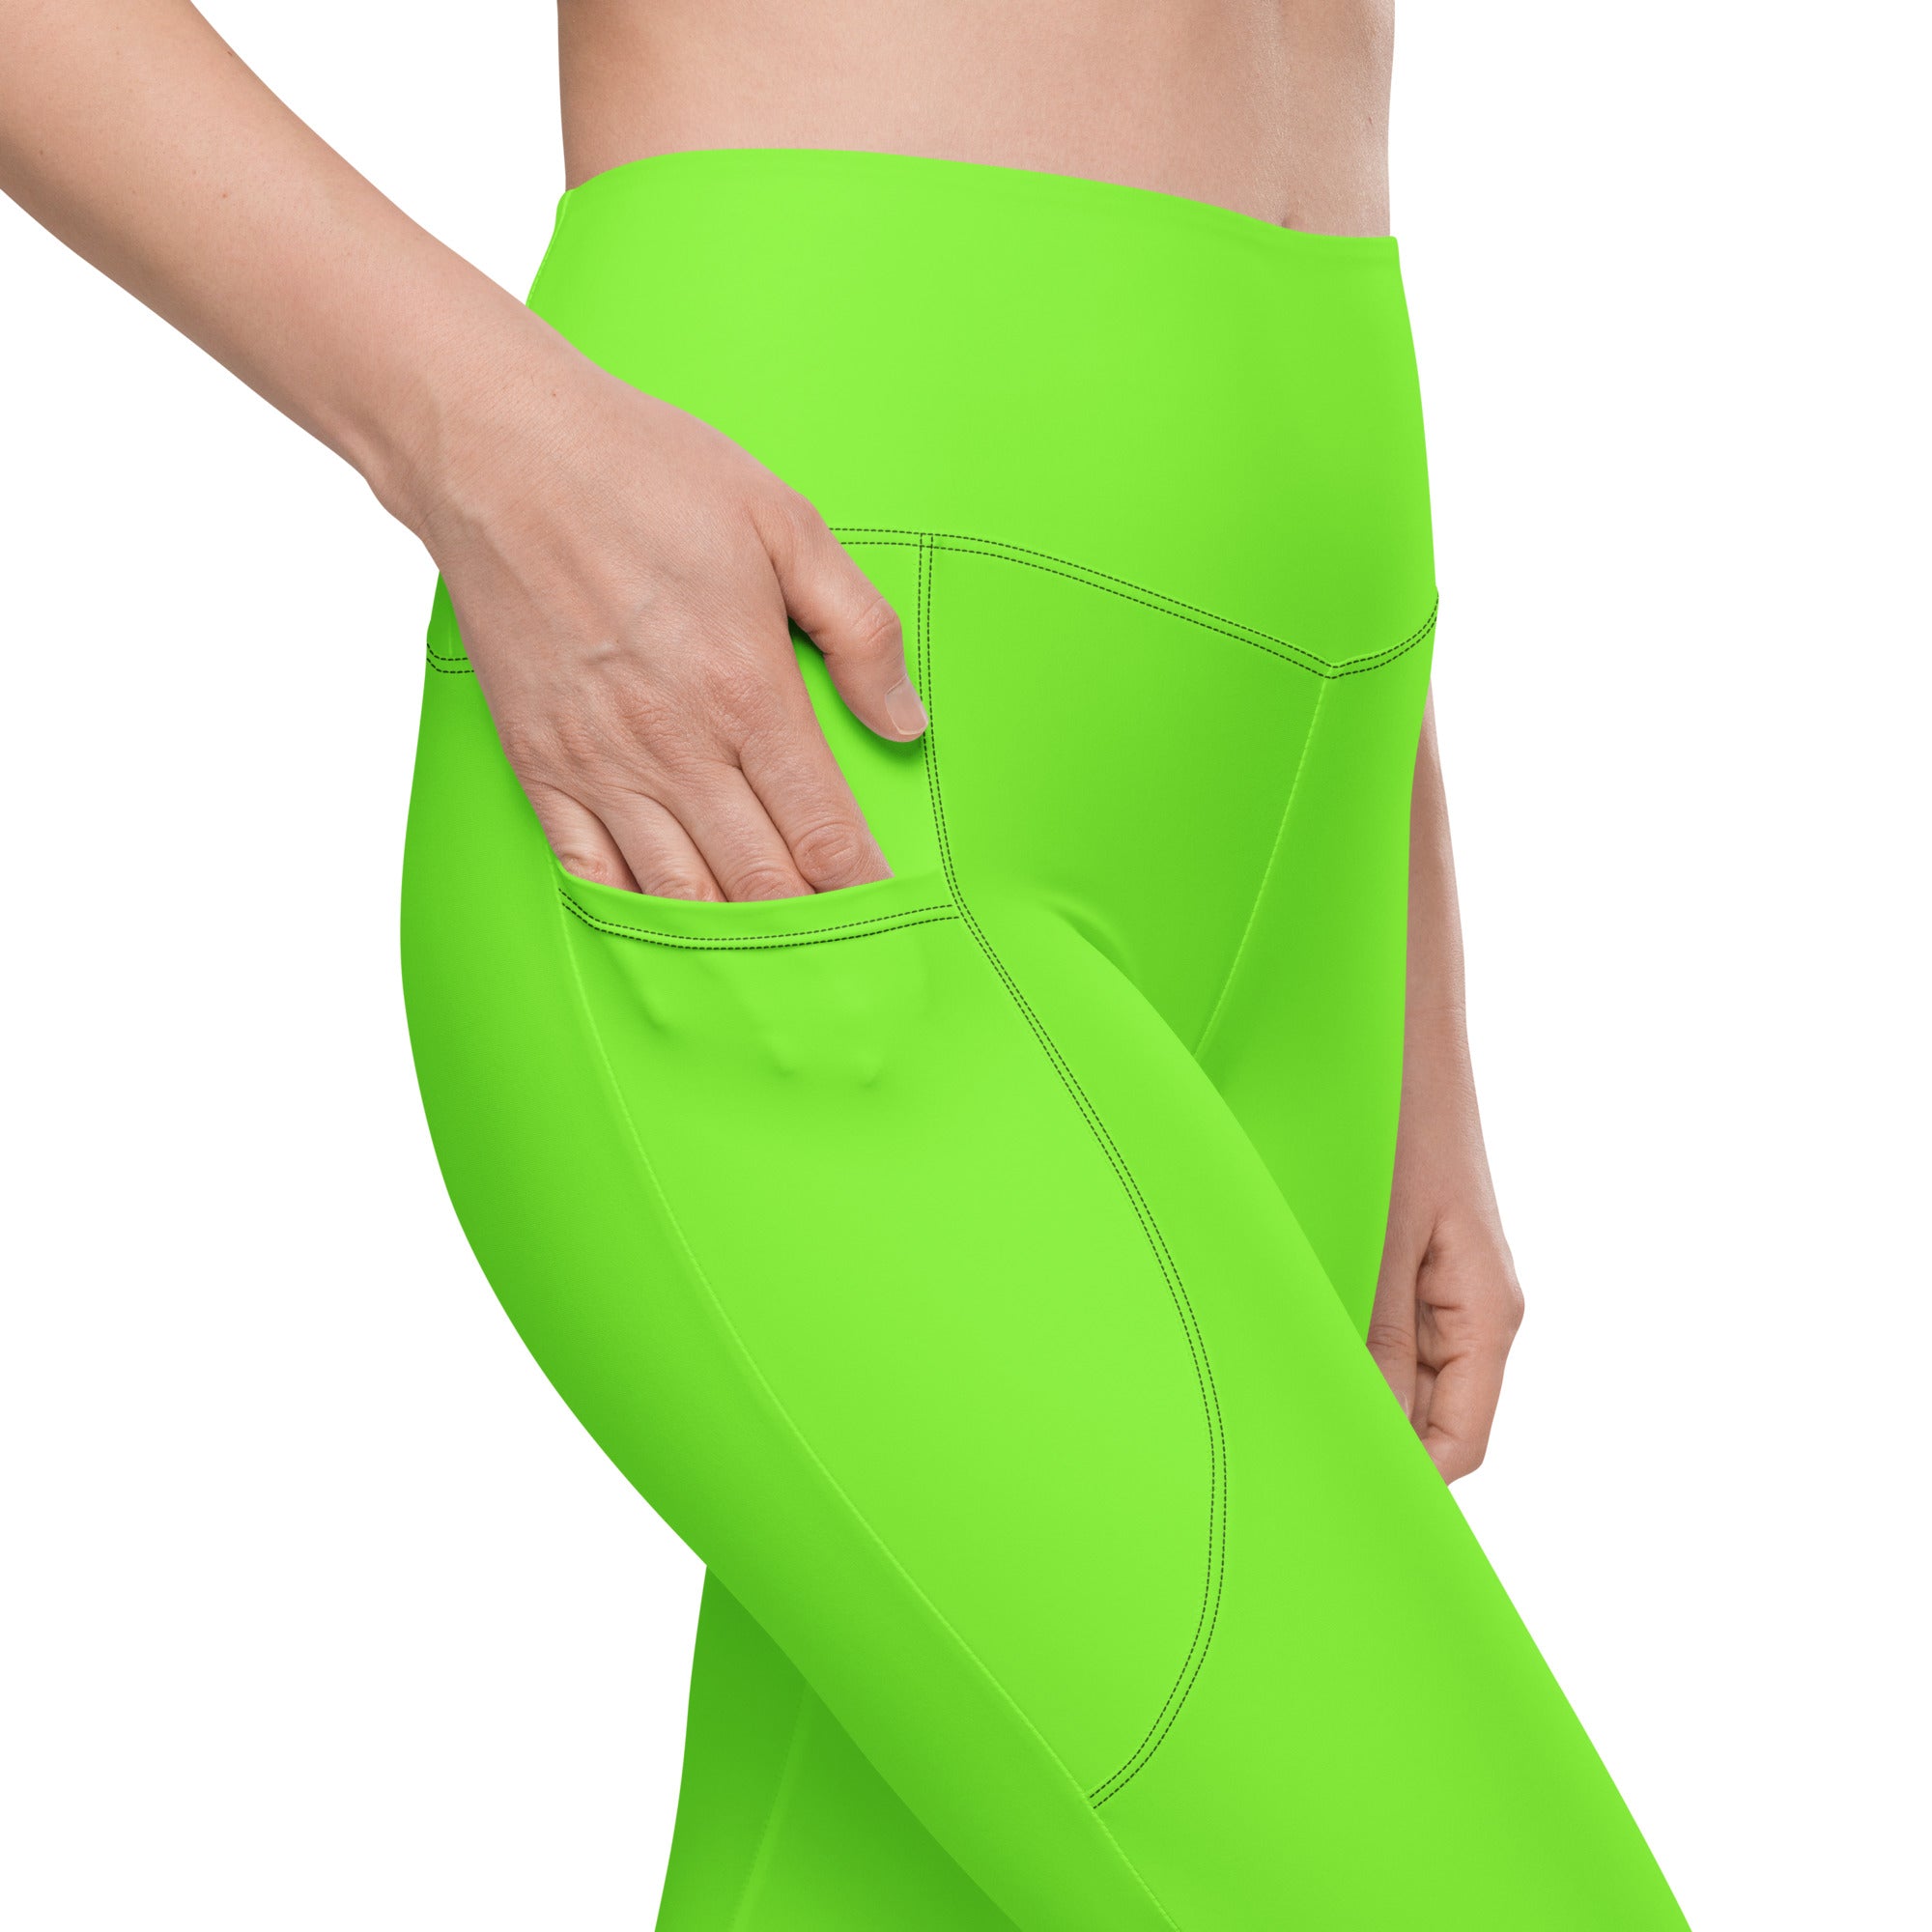 Neon Yellow Solid Leggings with pockets – Latitude 18